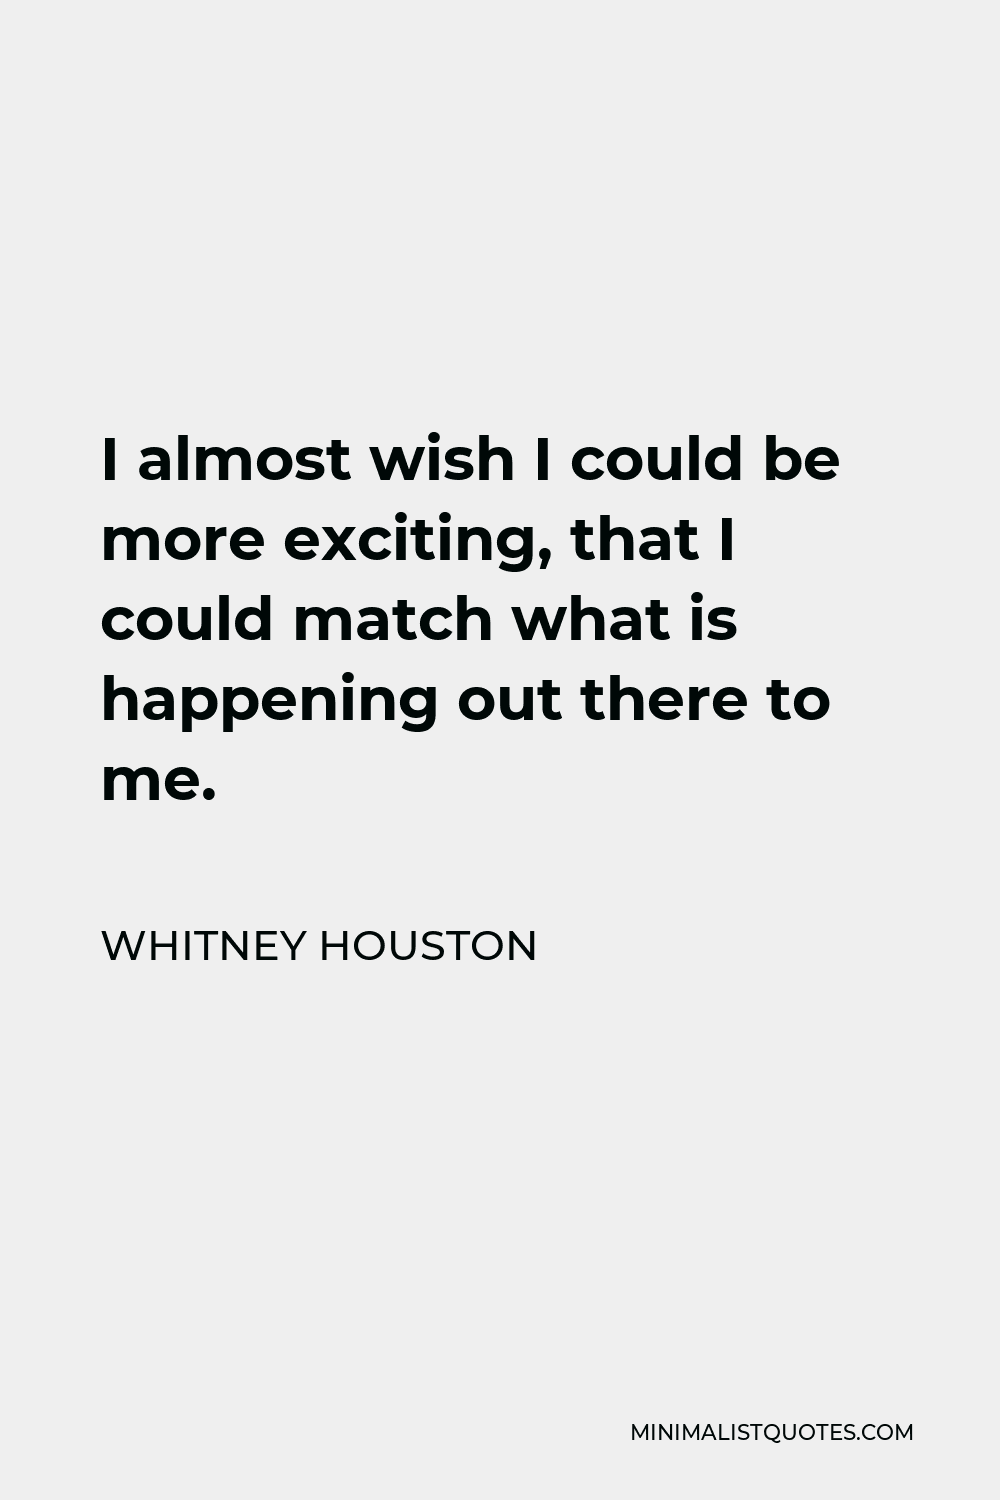 Whitney Houston Quote - I almost wish I could be more exciting, that I could match what is happening out there to me.